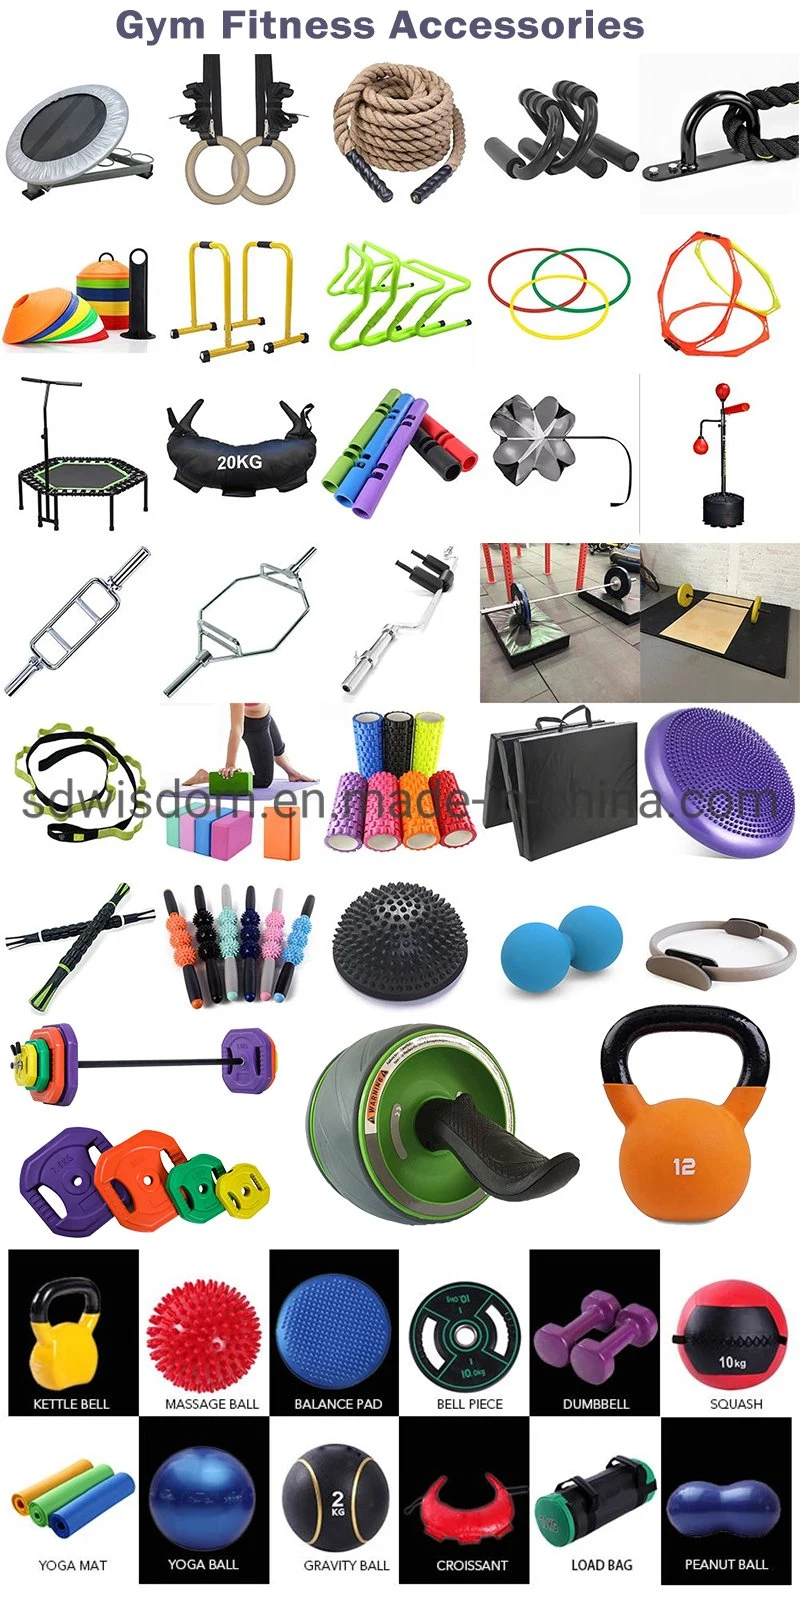 F9t05 Gym Equipment Body Building Synergy 360 Corssfit Machine for Commercial Gym Club